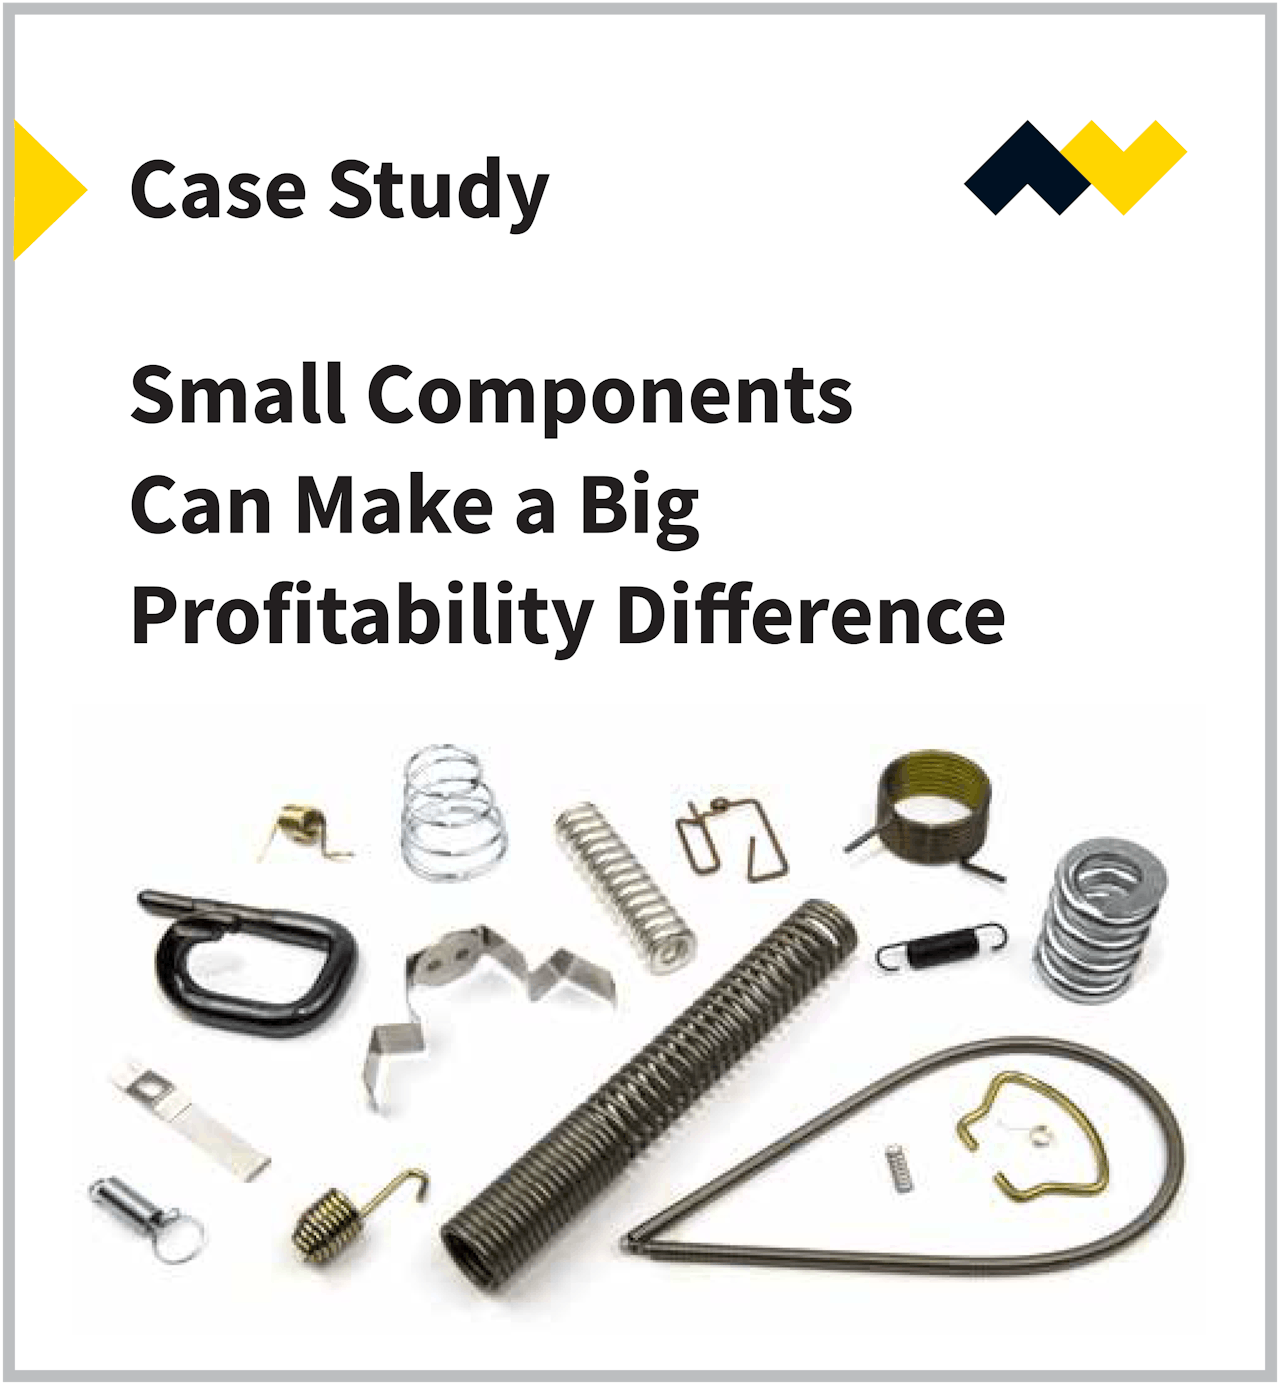 Small Components Can Make a Big Profitability Difference